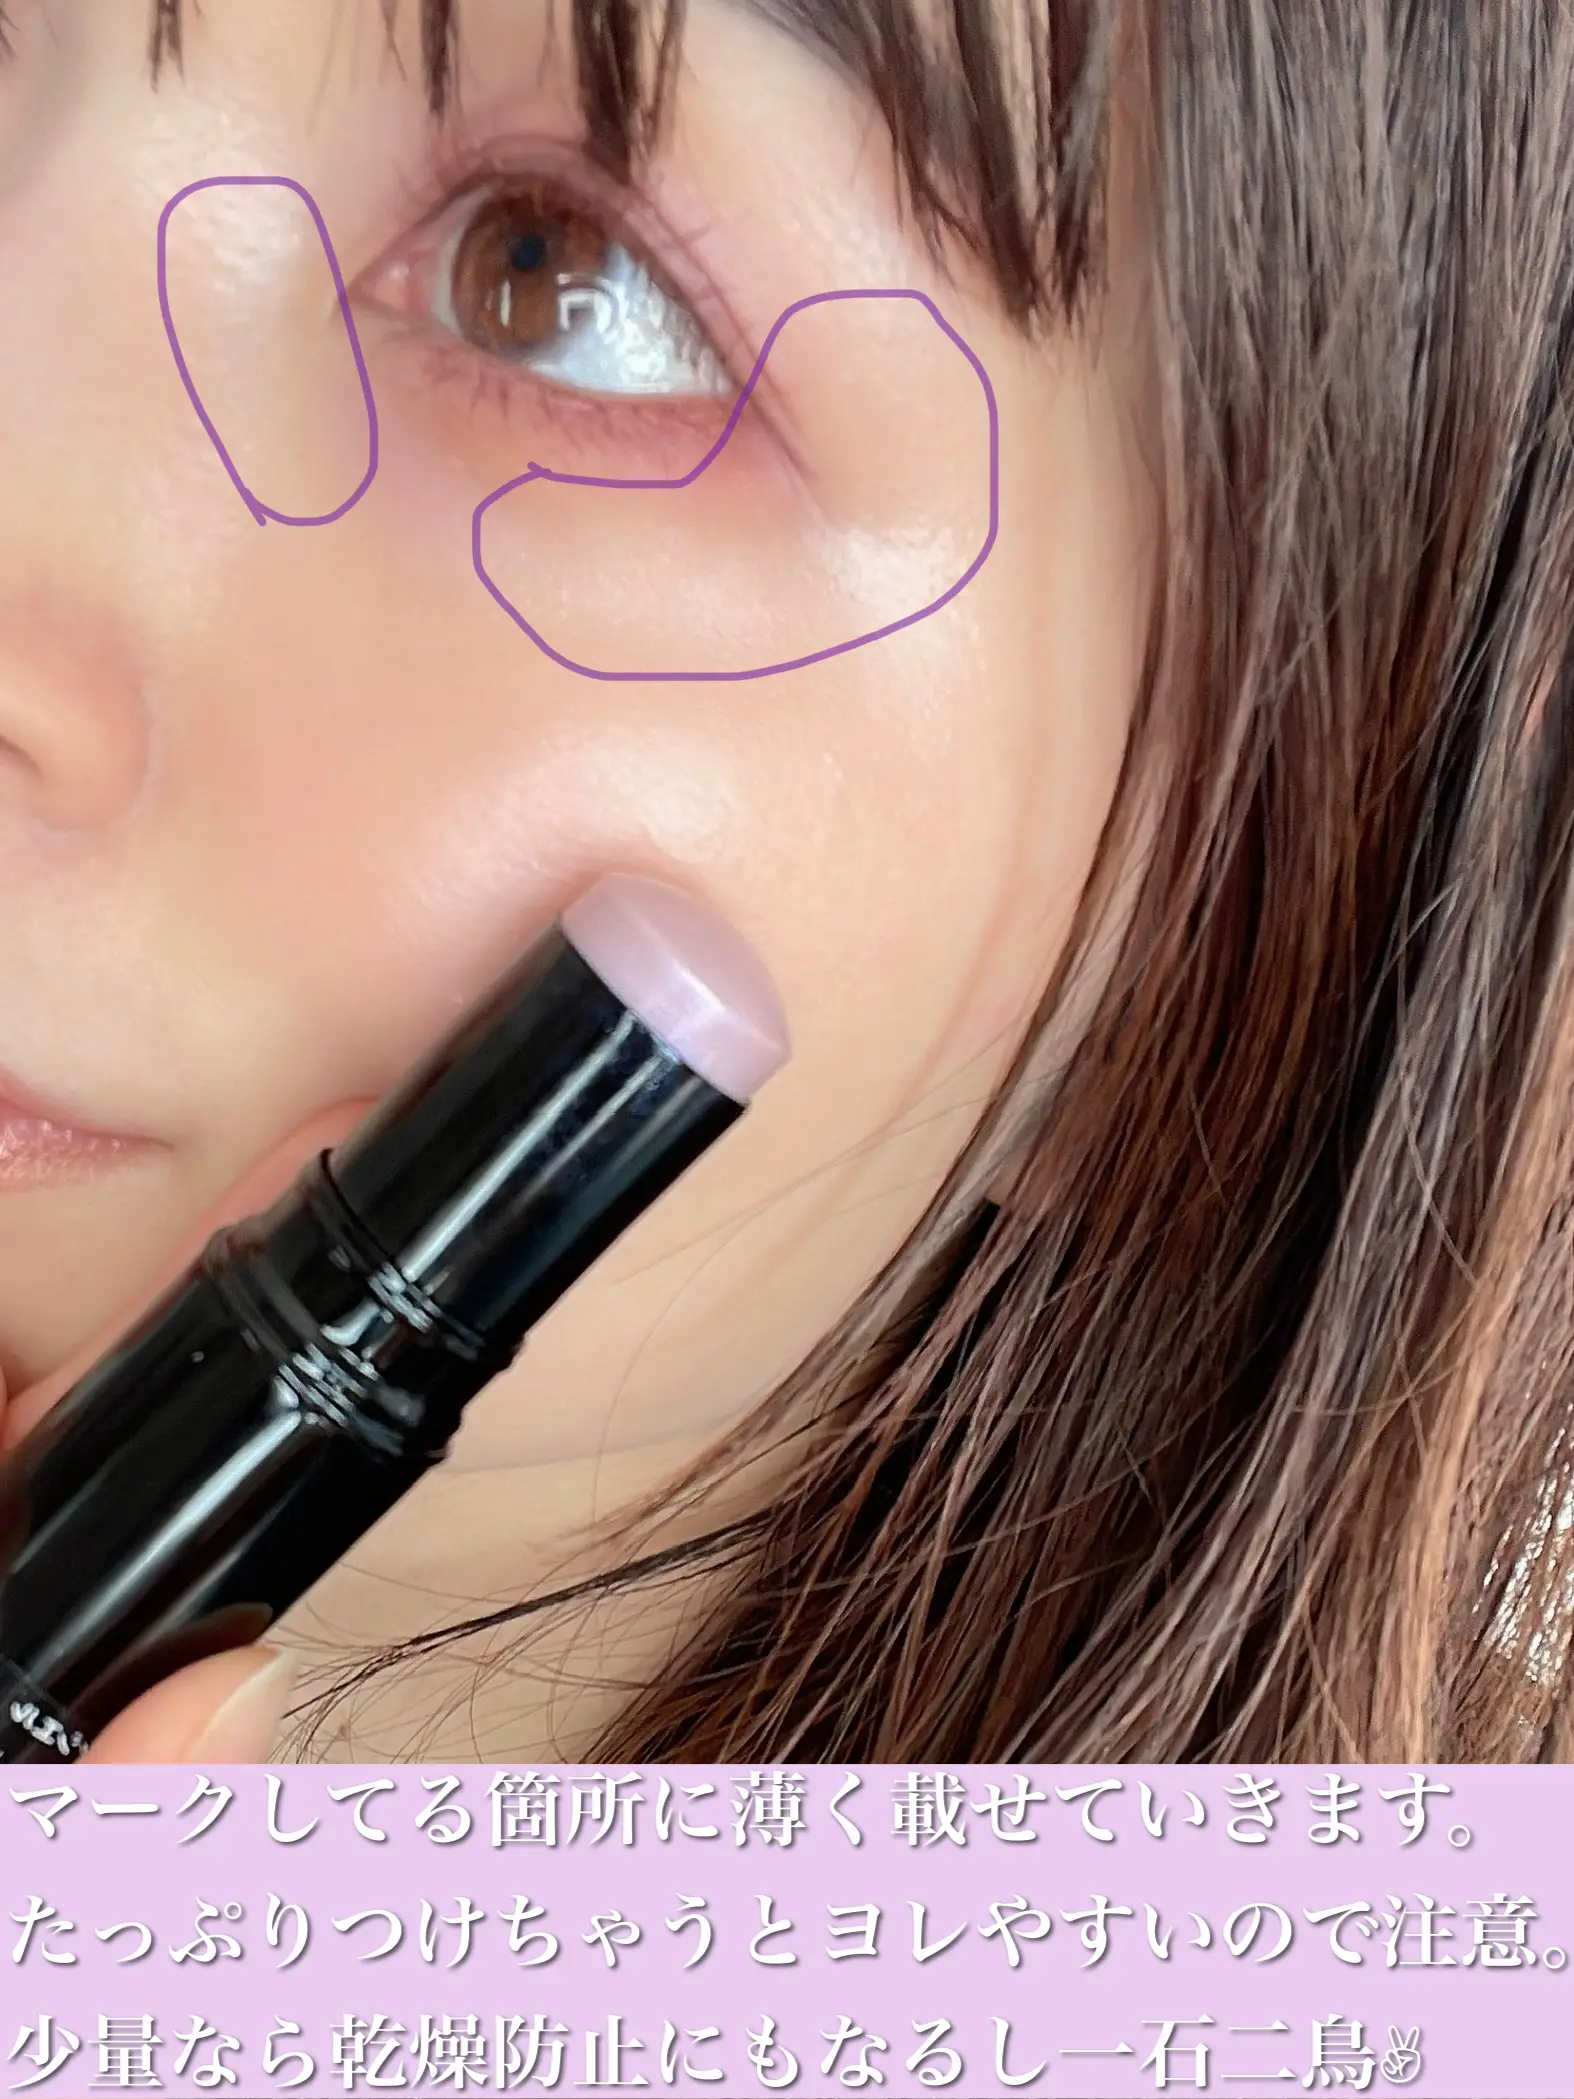 New work for glossy skin! CHANEL's purple highlight